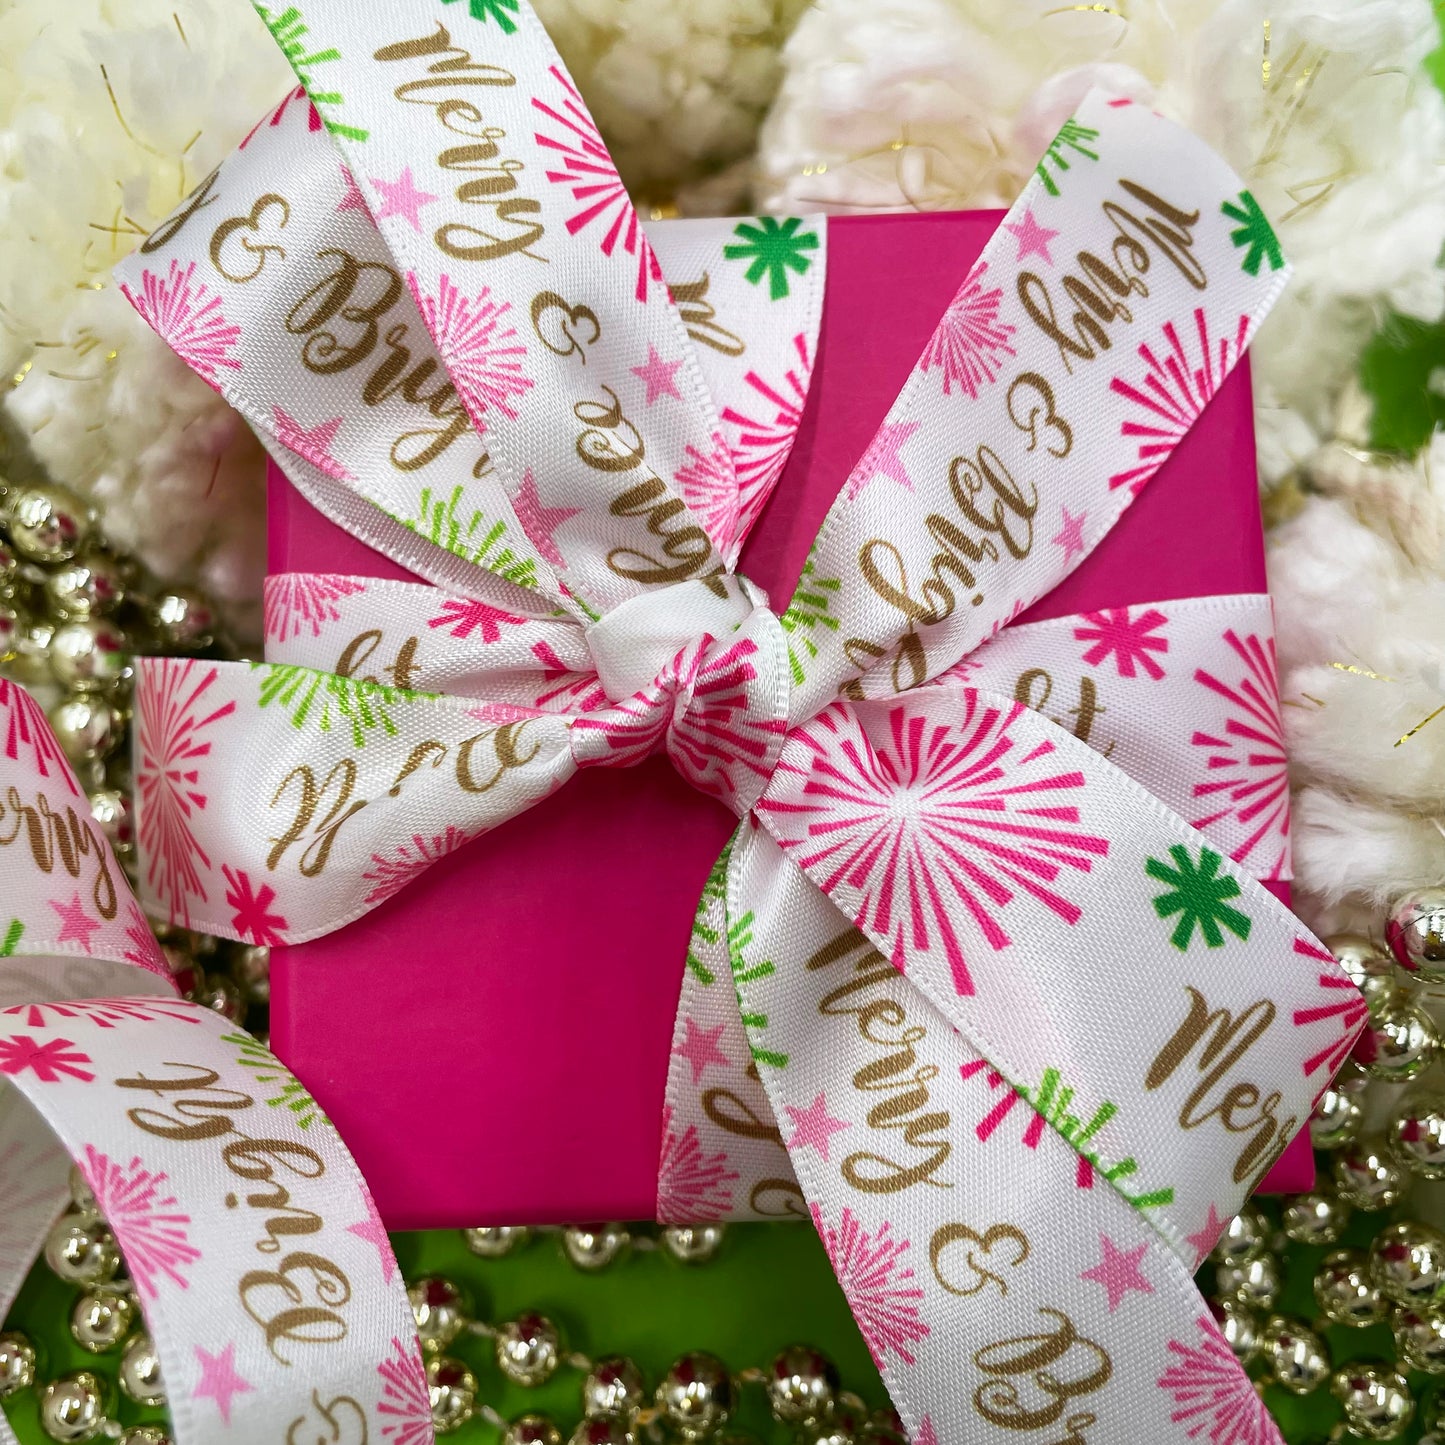 Merry and Bright  Holiday ribbon in silver and gold or pink and green with vintage sun bursts printed on 7/8" white single face satin ribbon